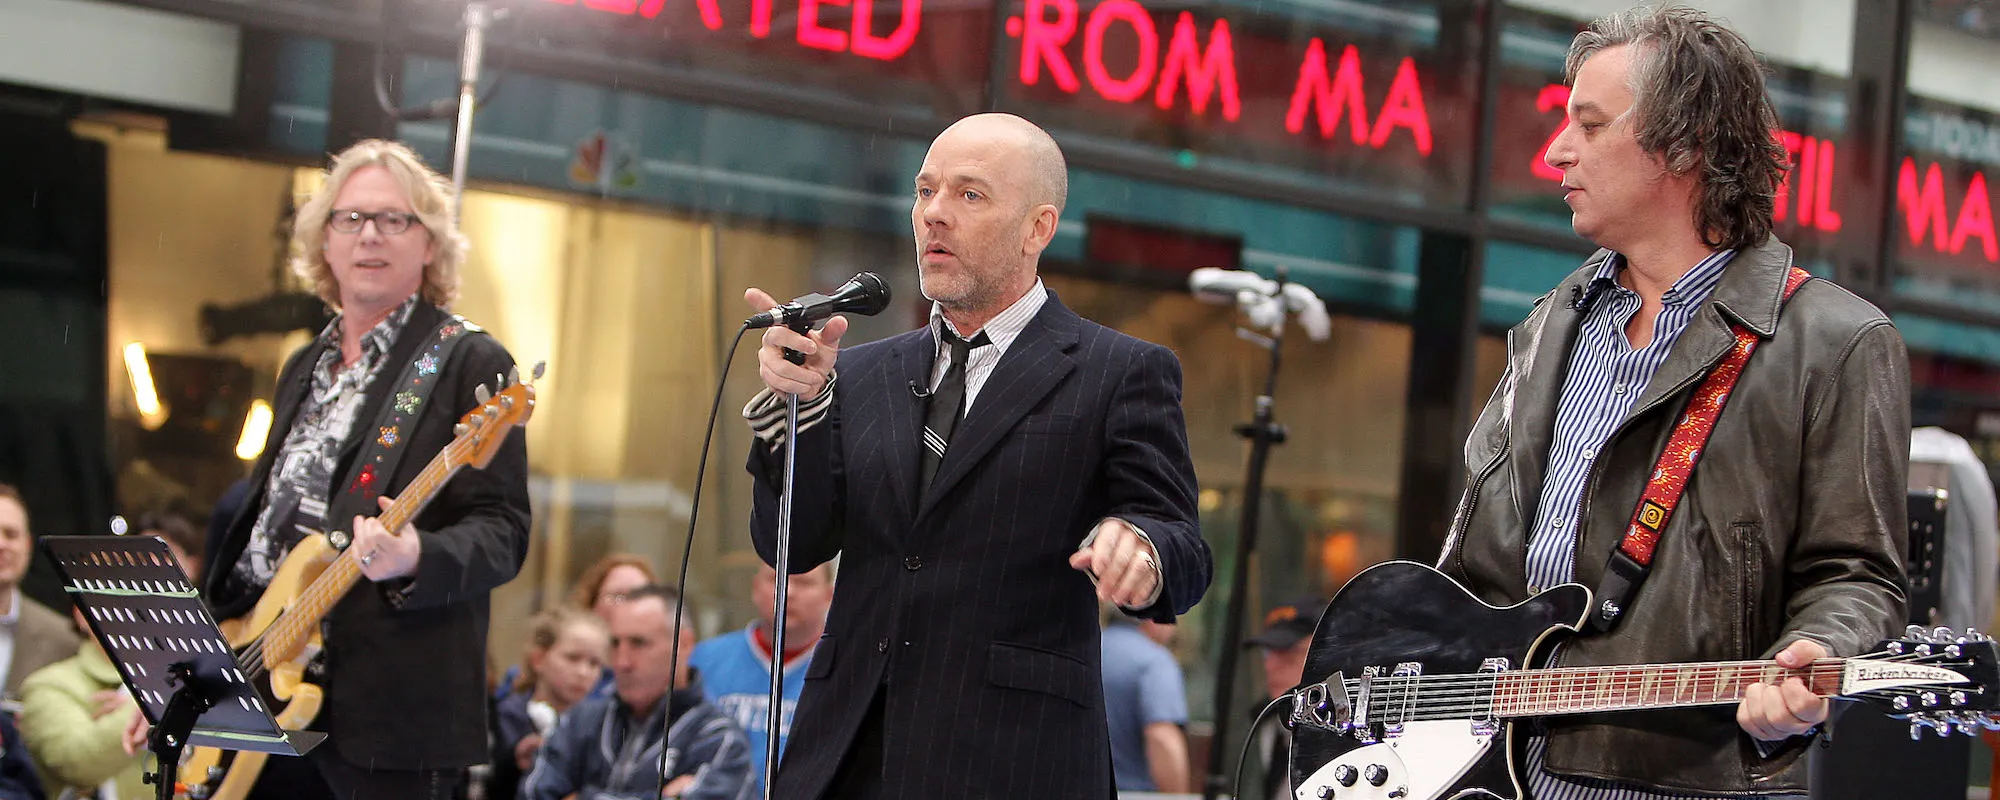 The Story Behind R.E.M.’s Ode to a Post-9/11 City, “Leaving New York”